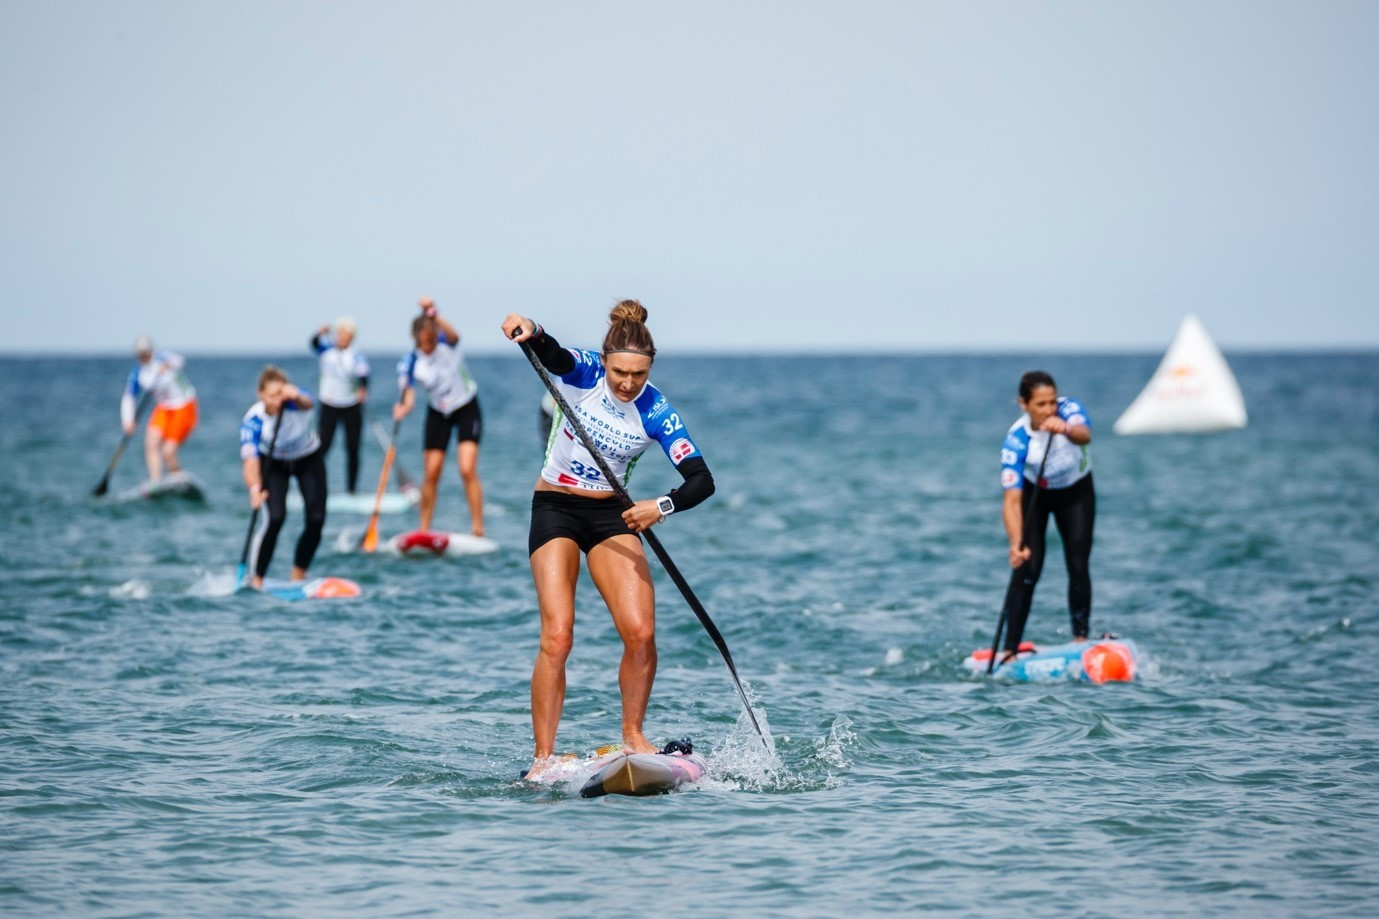 The announcement comes after gender equity was successfully featured for the first time at the 2017 ISA World StandUp Paddle and Paddleboard Championship in Denmark ©ISA